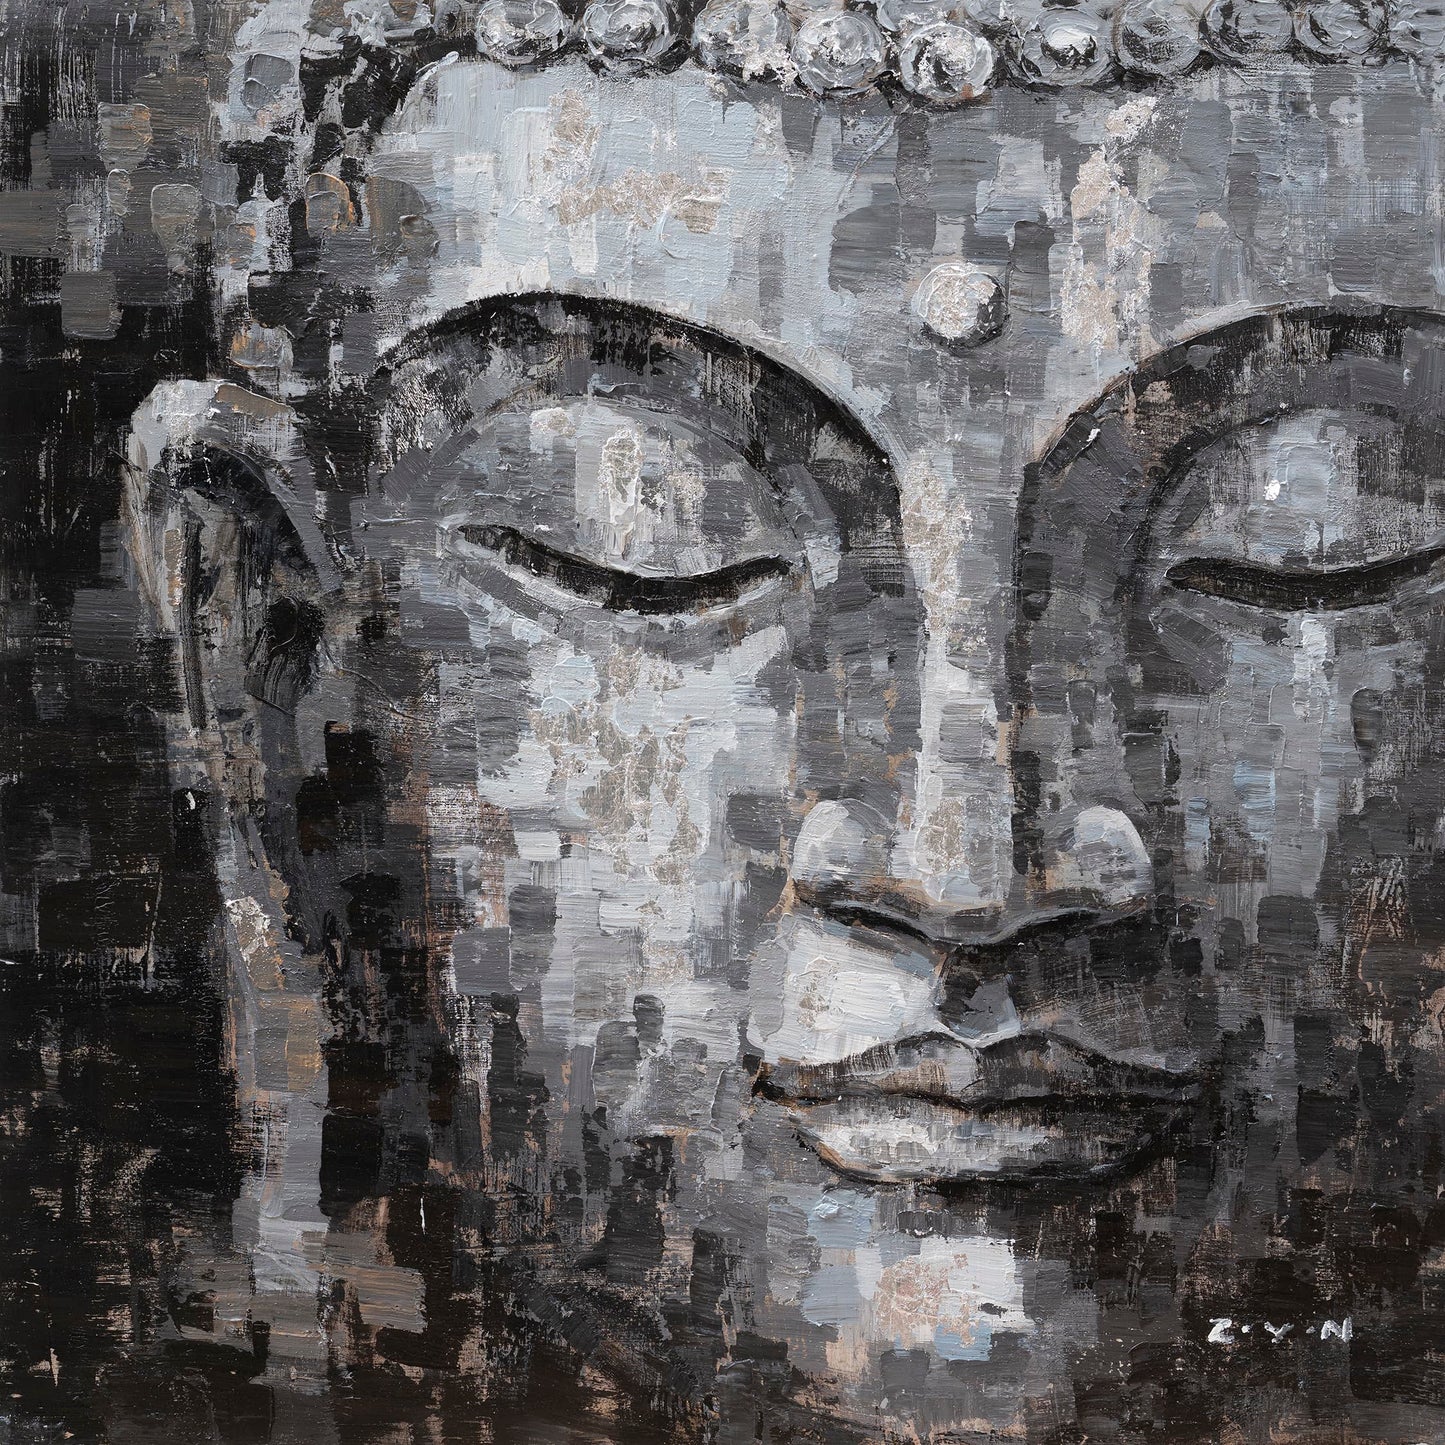 Hand-painted "Golden Buddha on black background" Oil painting on canvas original, Canvas Wall art - Wrapped Canvas Painting